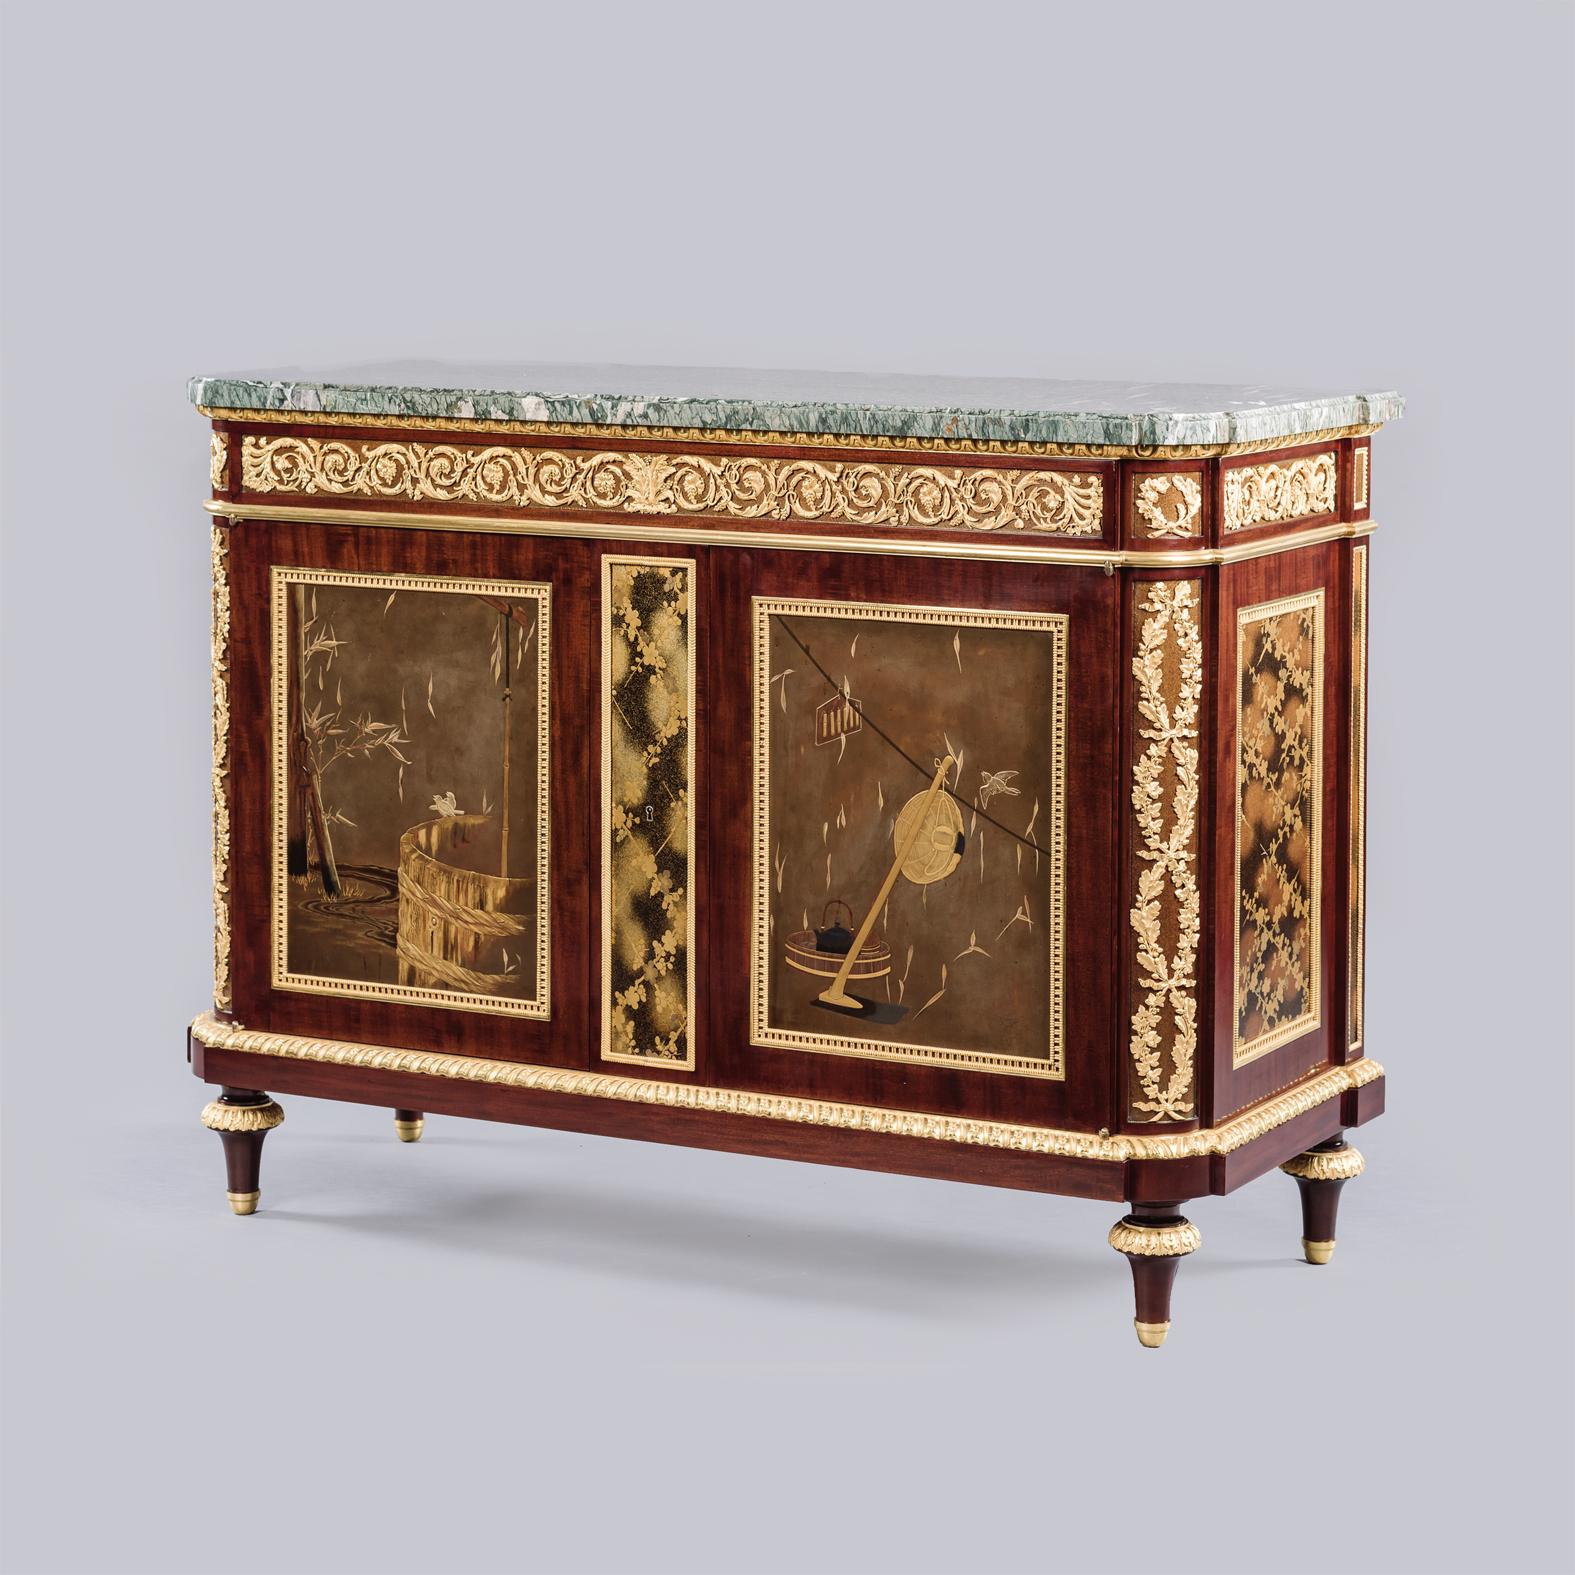 An exceptional Louis XVI style gilt-bronze and lacquer mounted mahogany commode À Vantaux by Alfred-Emmanuel-Louis Beurdeley.

Stamped to the carcass with a 'marque au feu' for ‘A BEURDELEY A PARIS’. 

This elegant and sophisticated mahogany commode